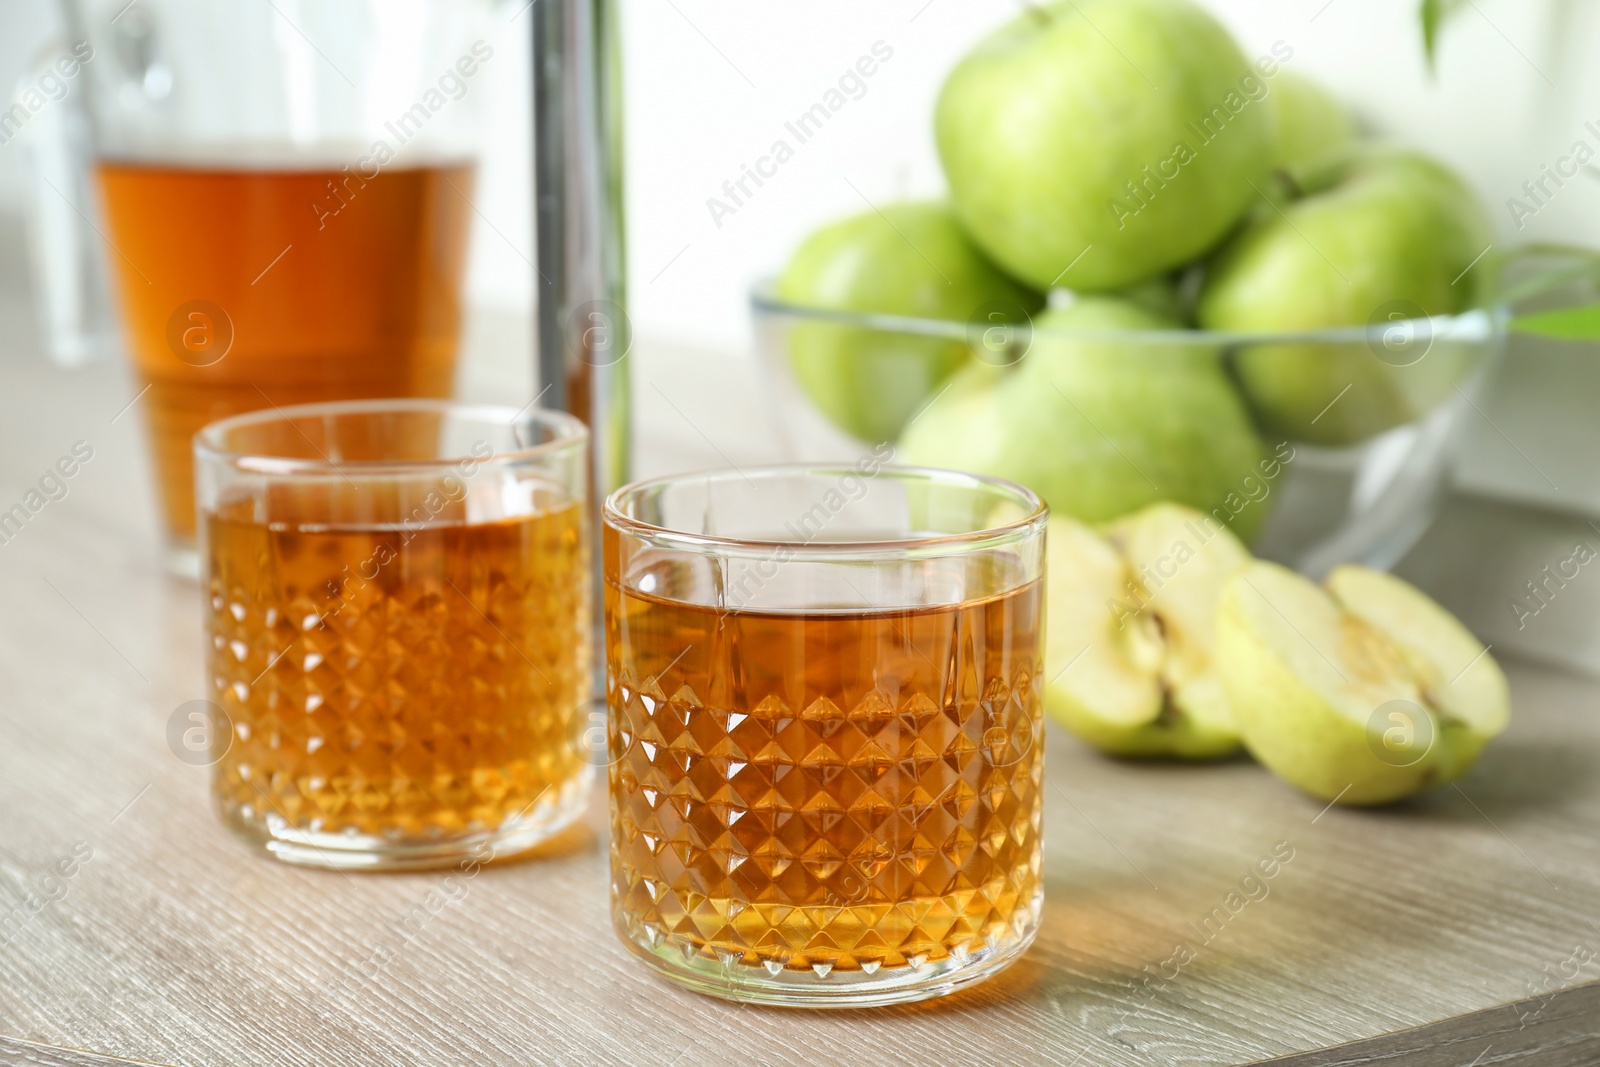 Photo of Glasses of apple juice on wooden table